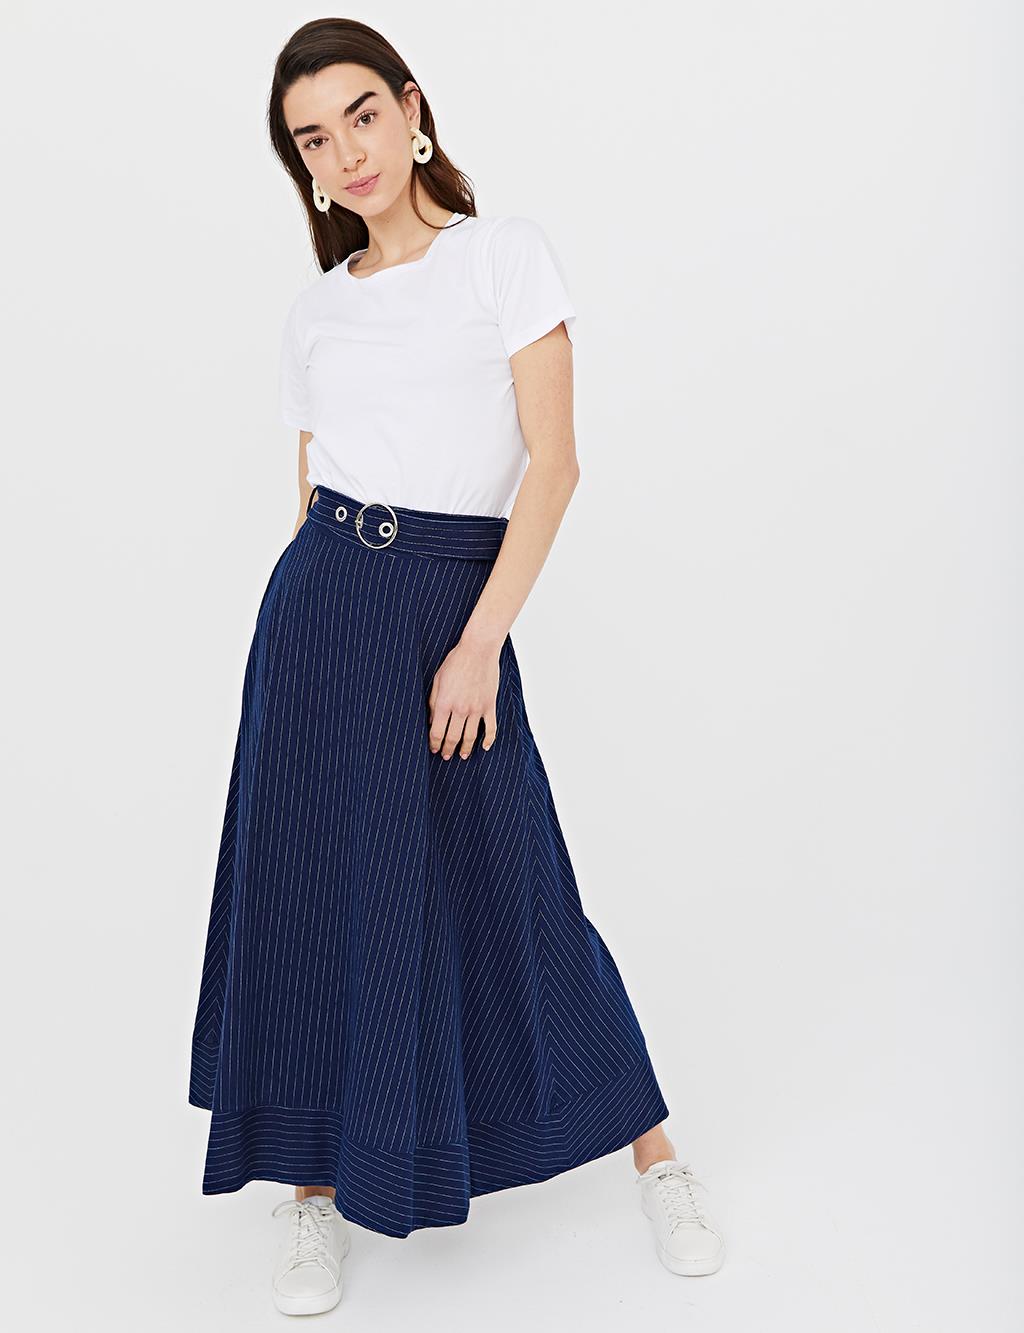 Belted Striped A-line Skirt B21 12006 Navy